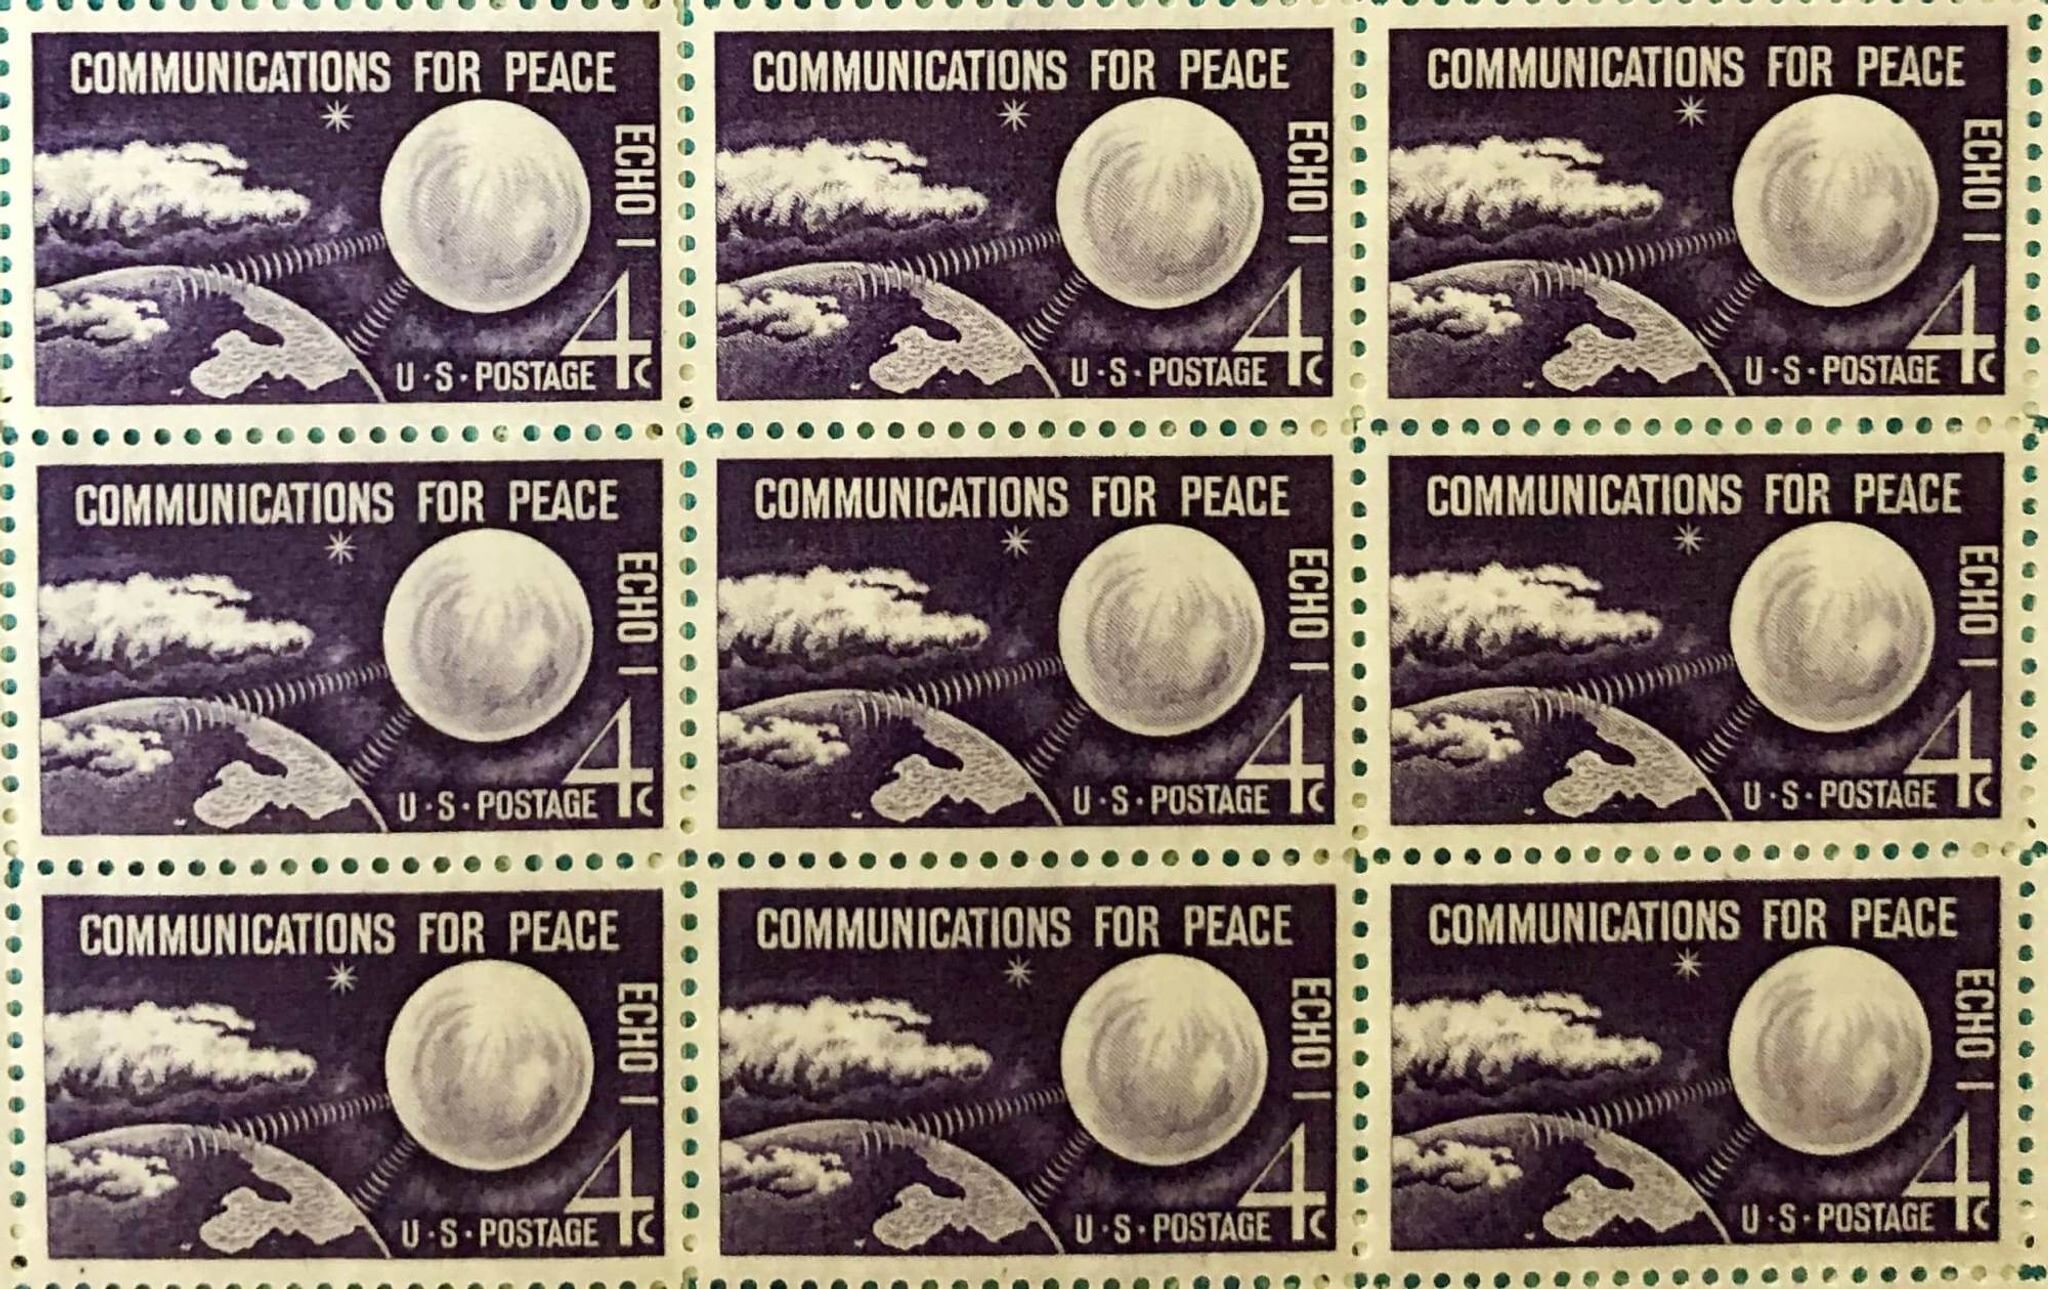 The Echo I satellite created by Northfield's Sheldahl Company was featured on a U.S. postage stamp just months after the satelloon's August 1960 launch.